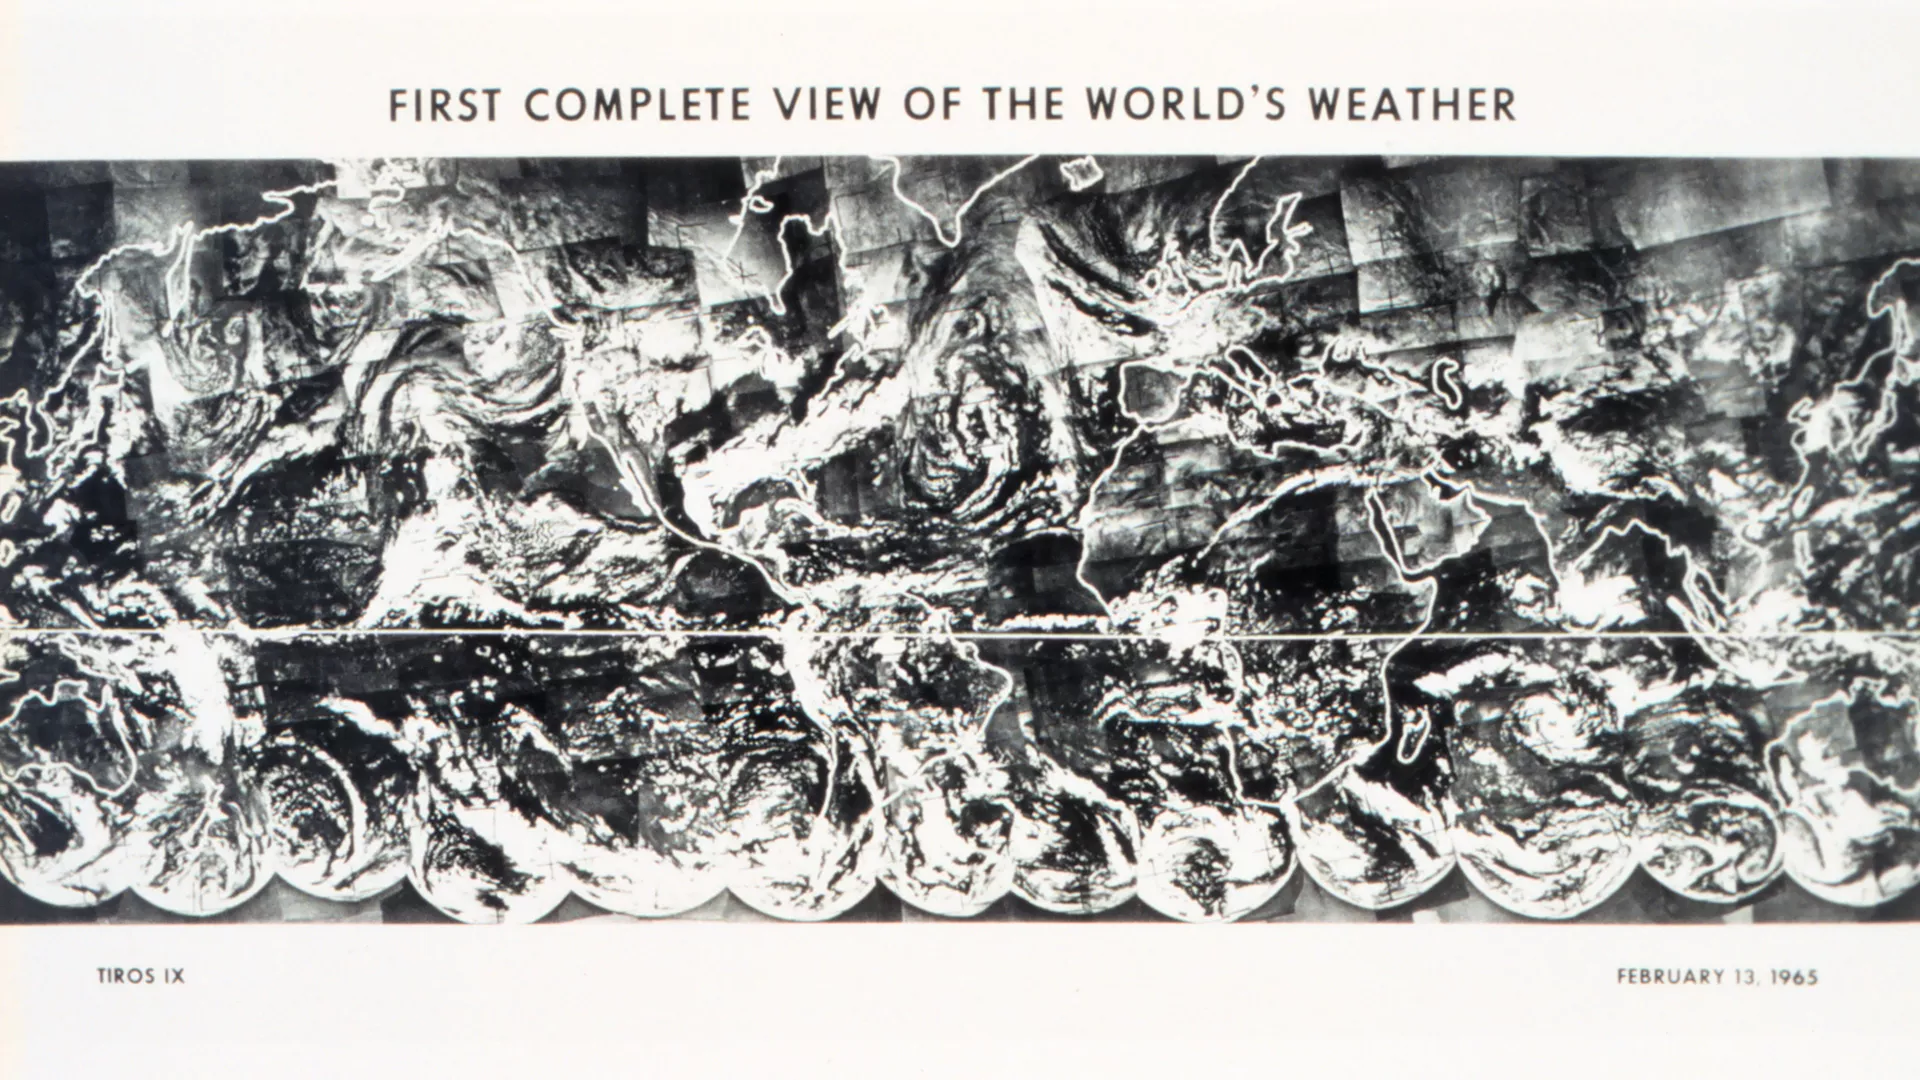 First complete view of the World's weather from the TIROS IX satellite, a mosaic of 450 photographs.